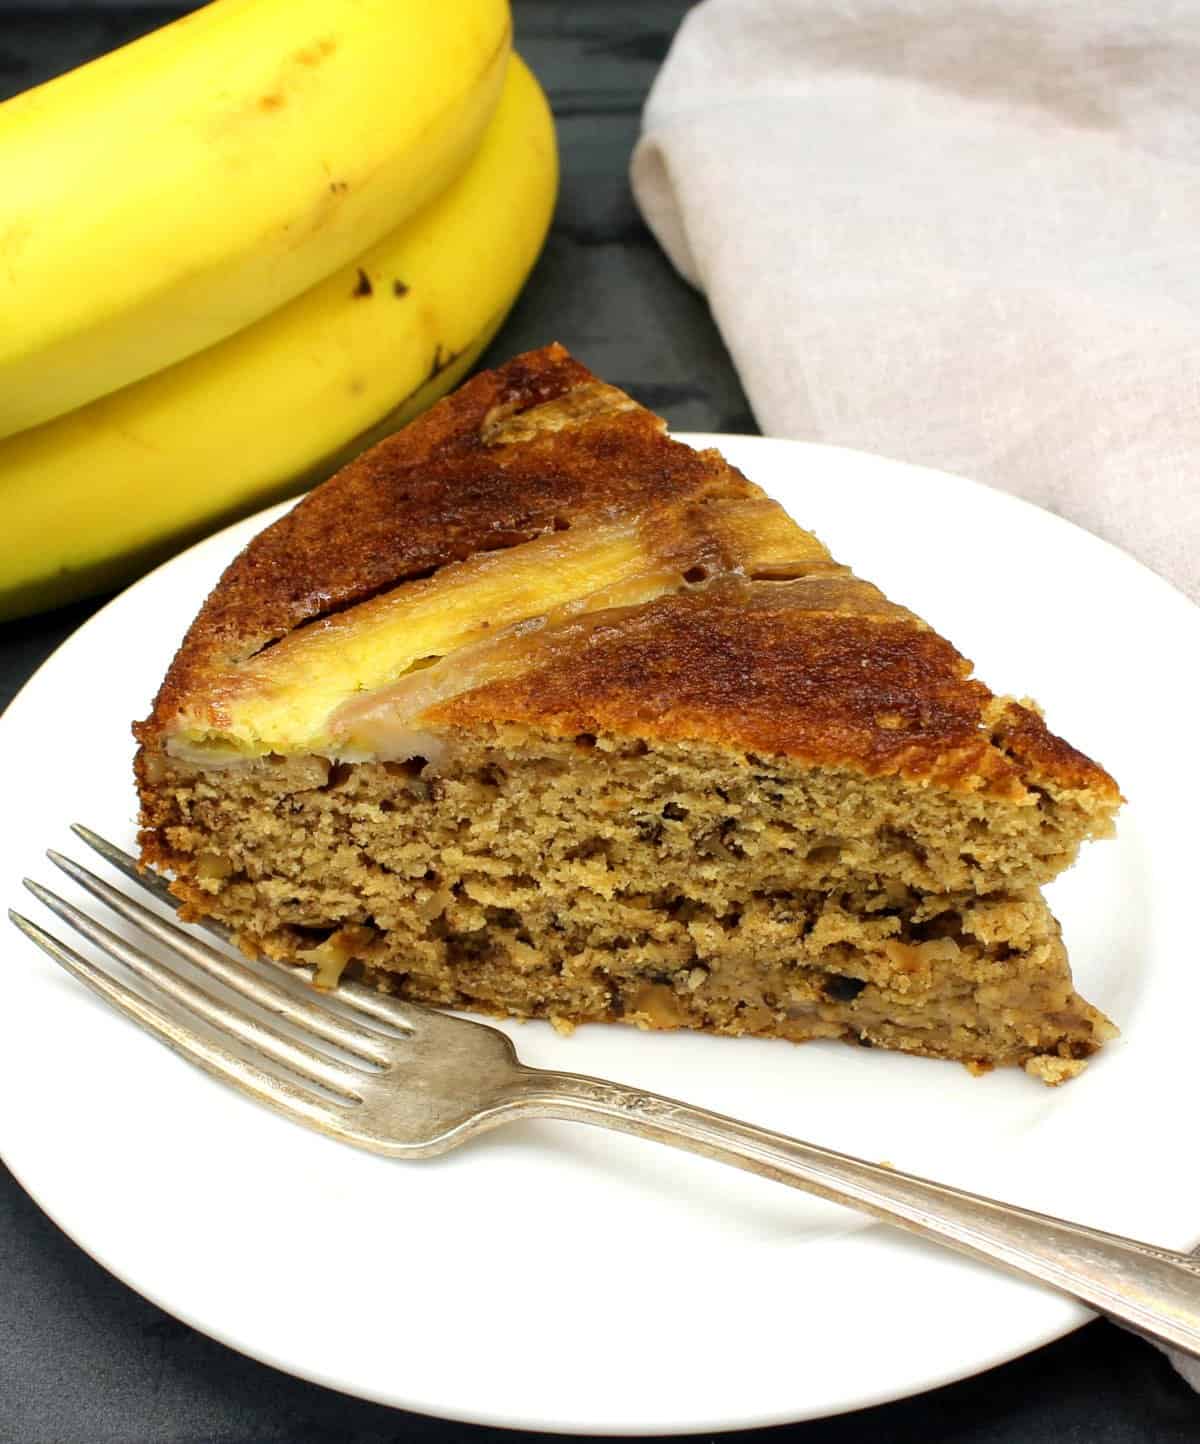 Slice of vegan banana cake with a fork and bananas in background.